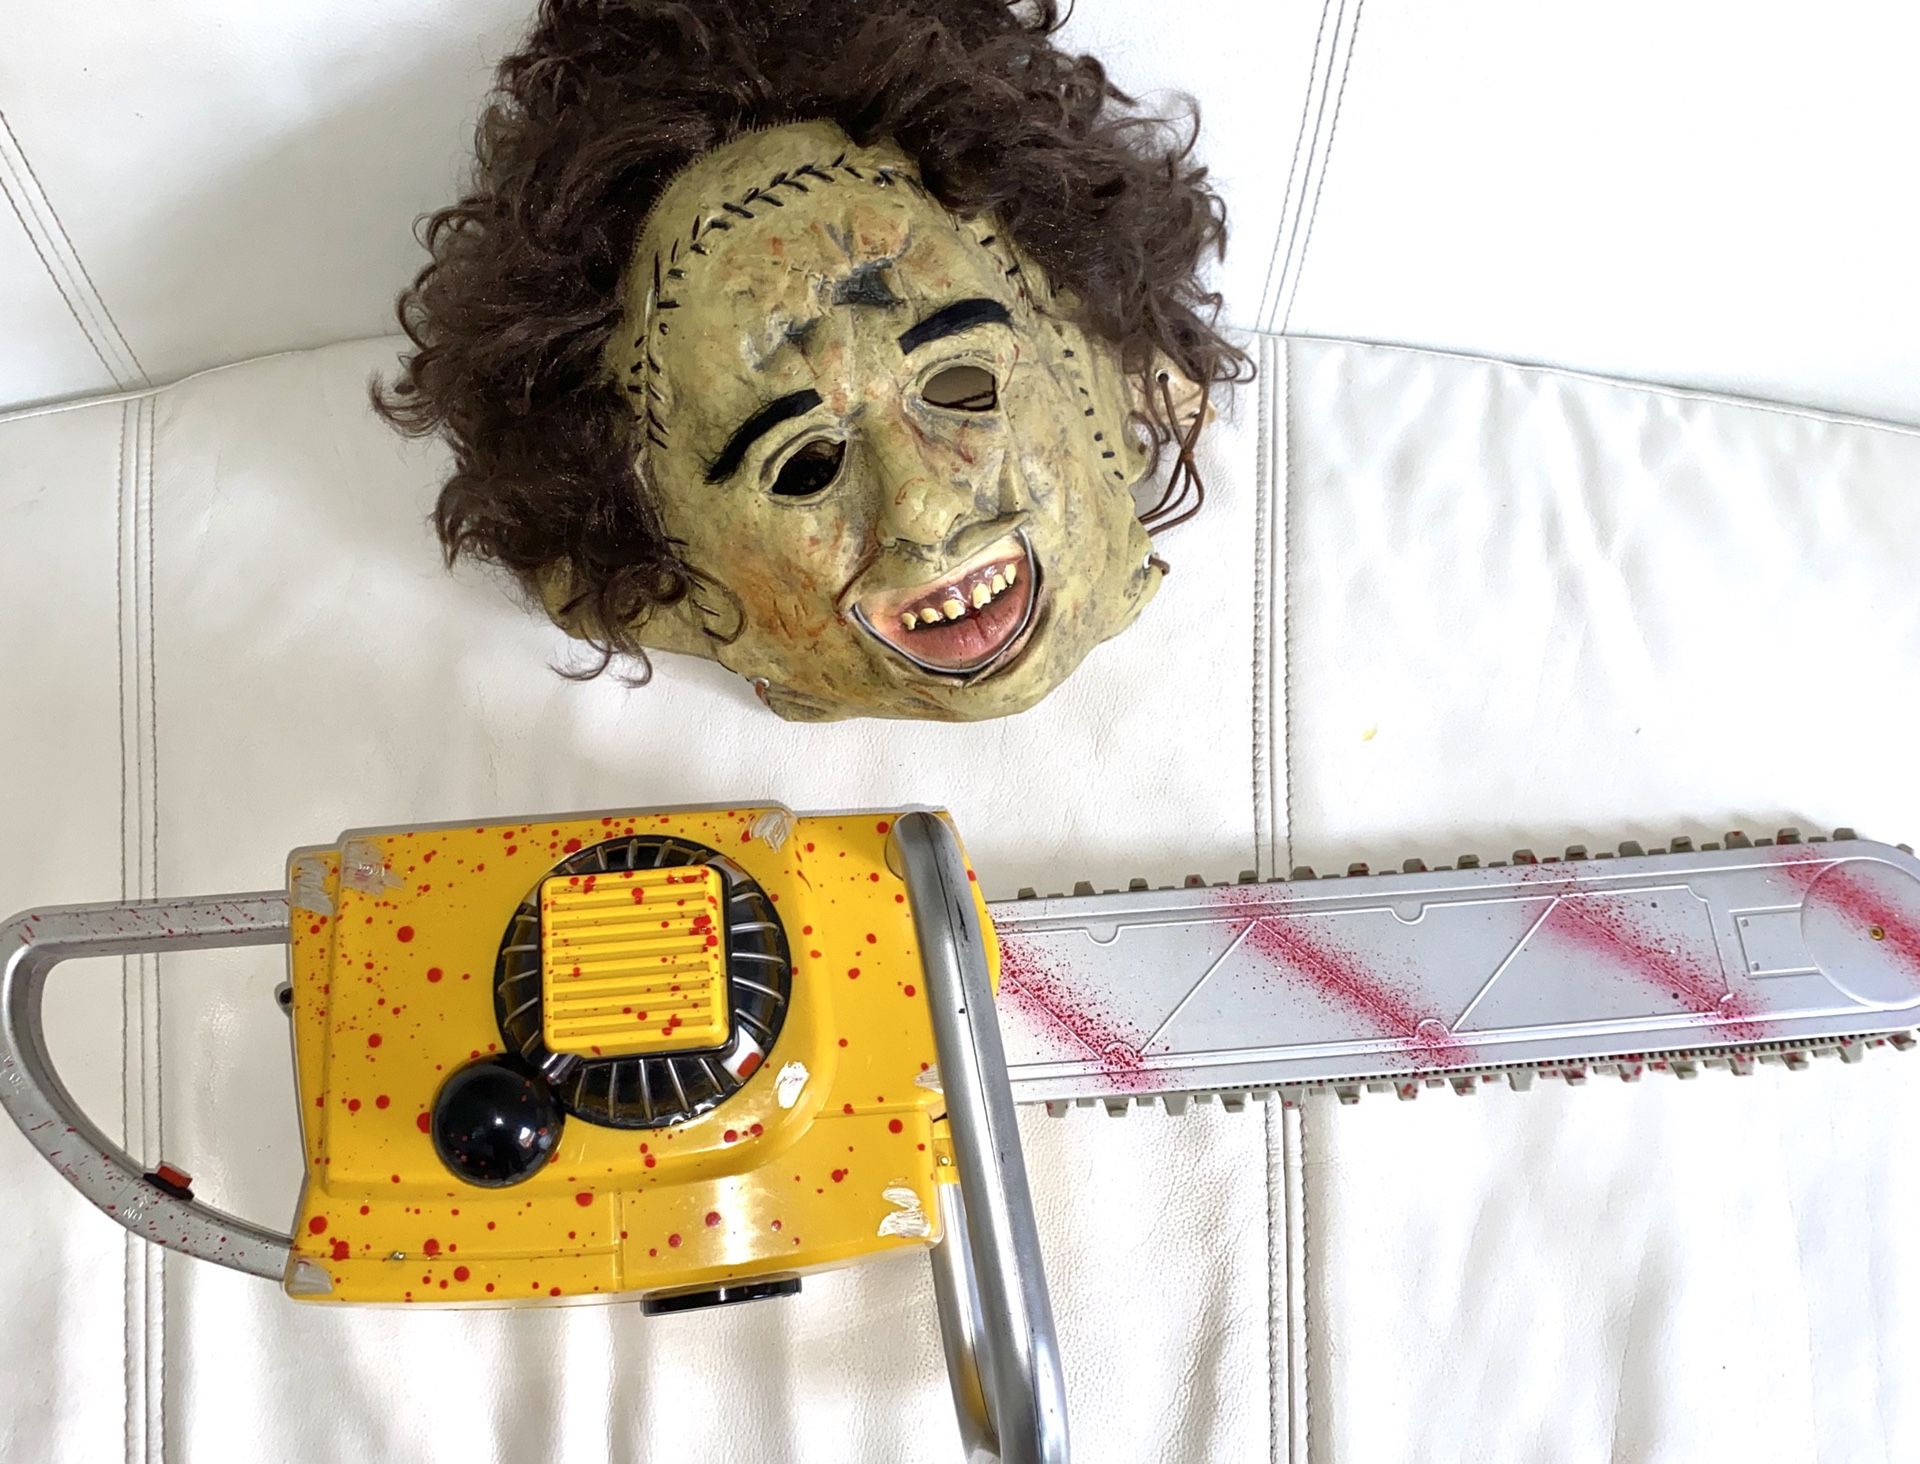 Leather face Halloween mask includes Toy bloody chainsaw